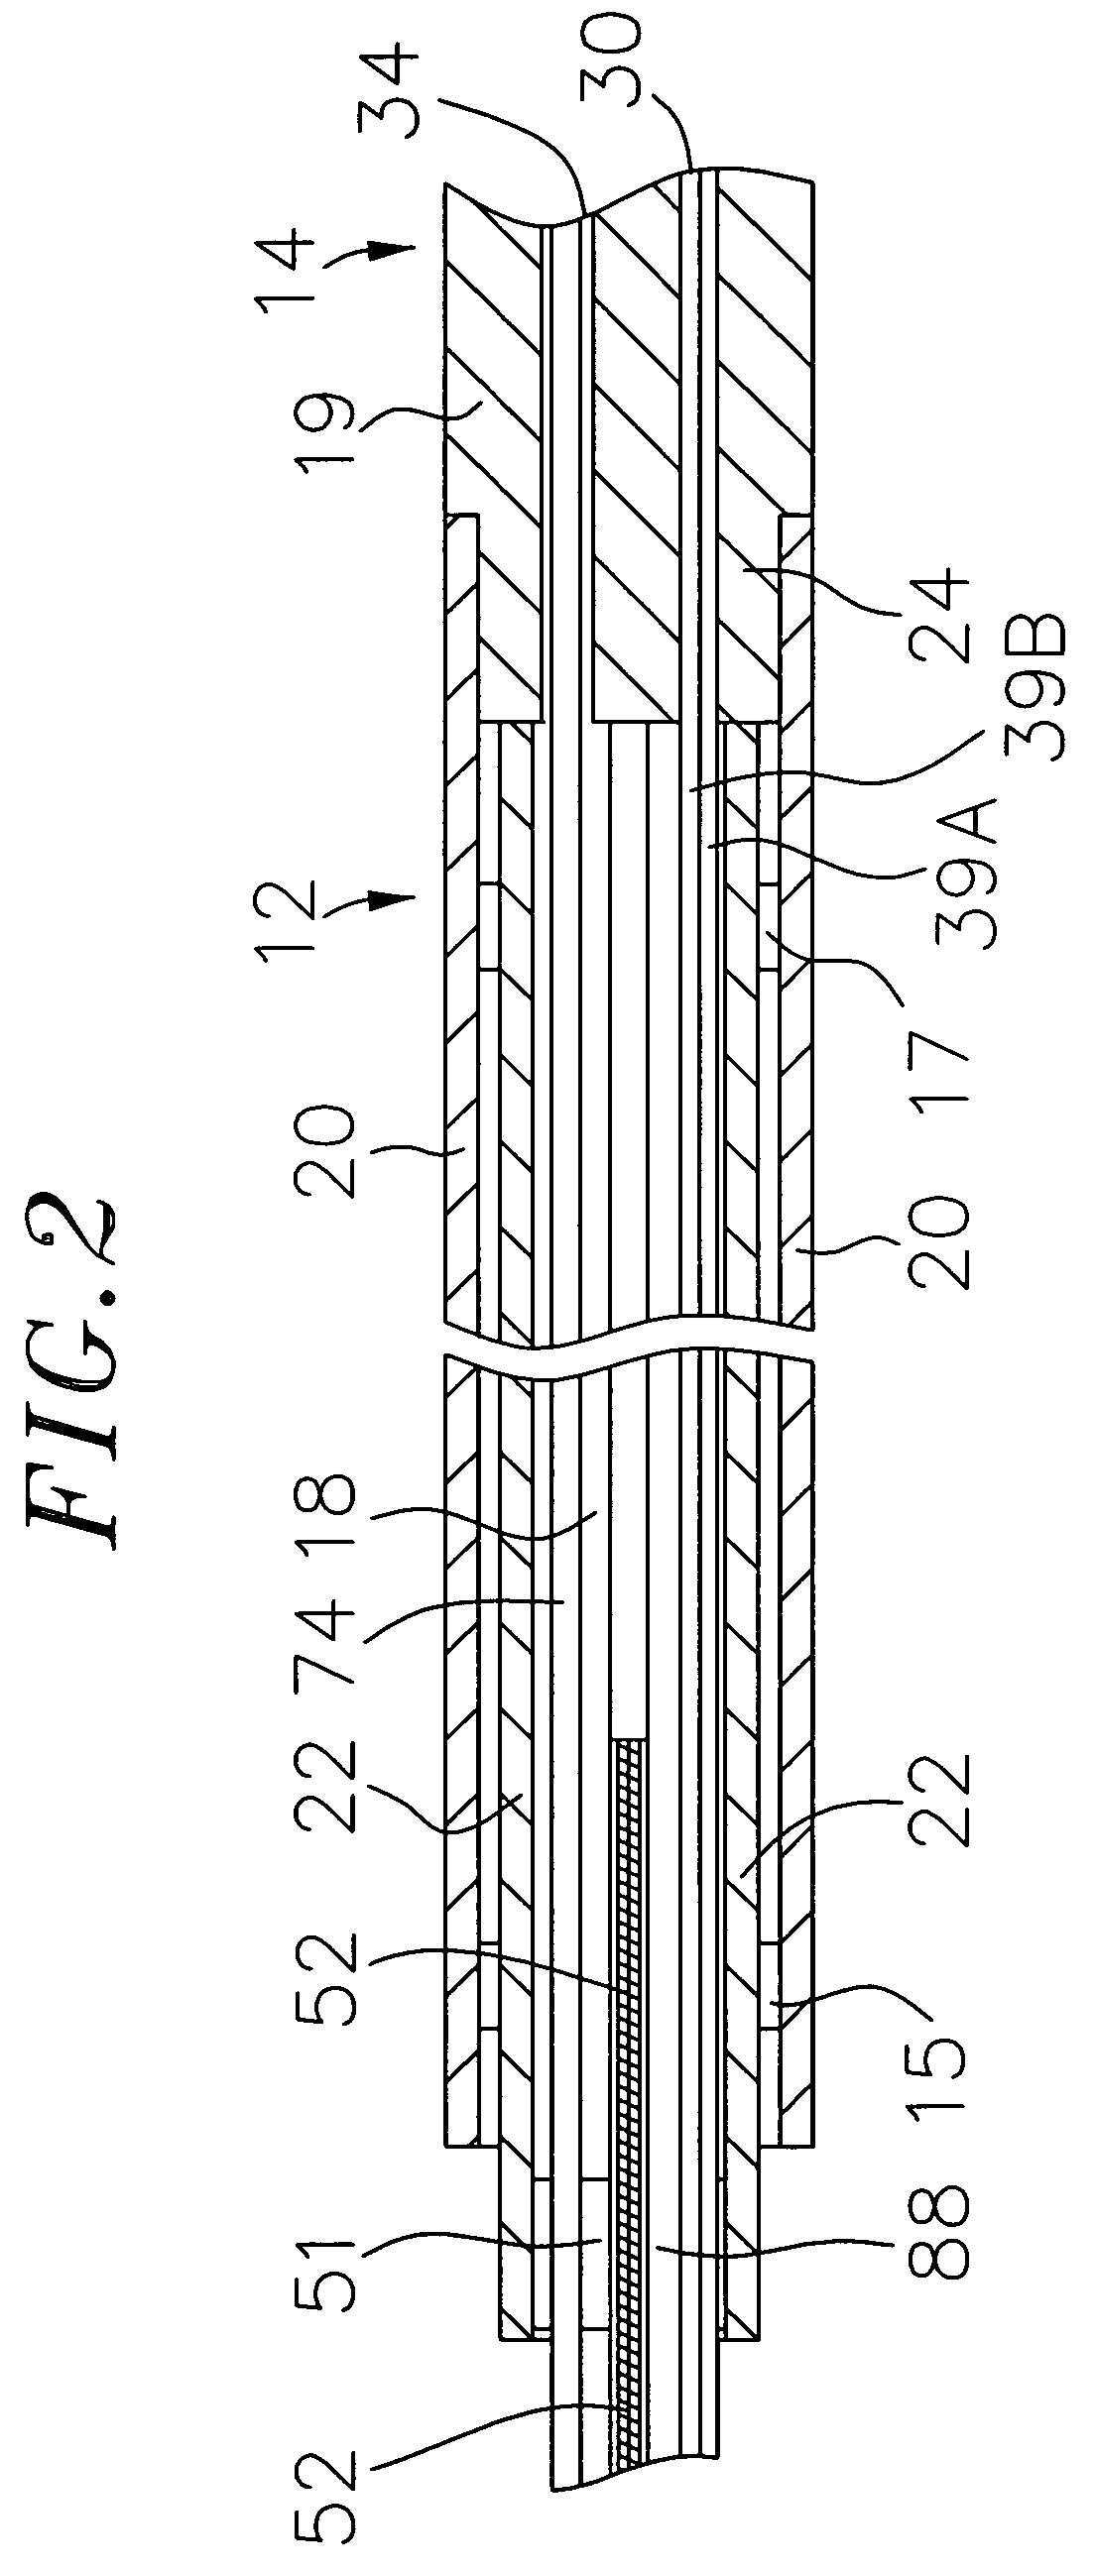 System and method for selectively energizing catheter electrodes